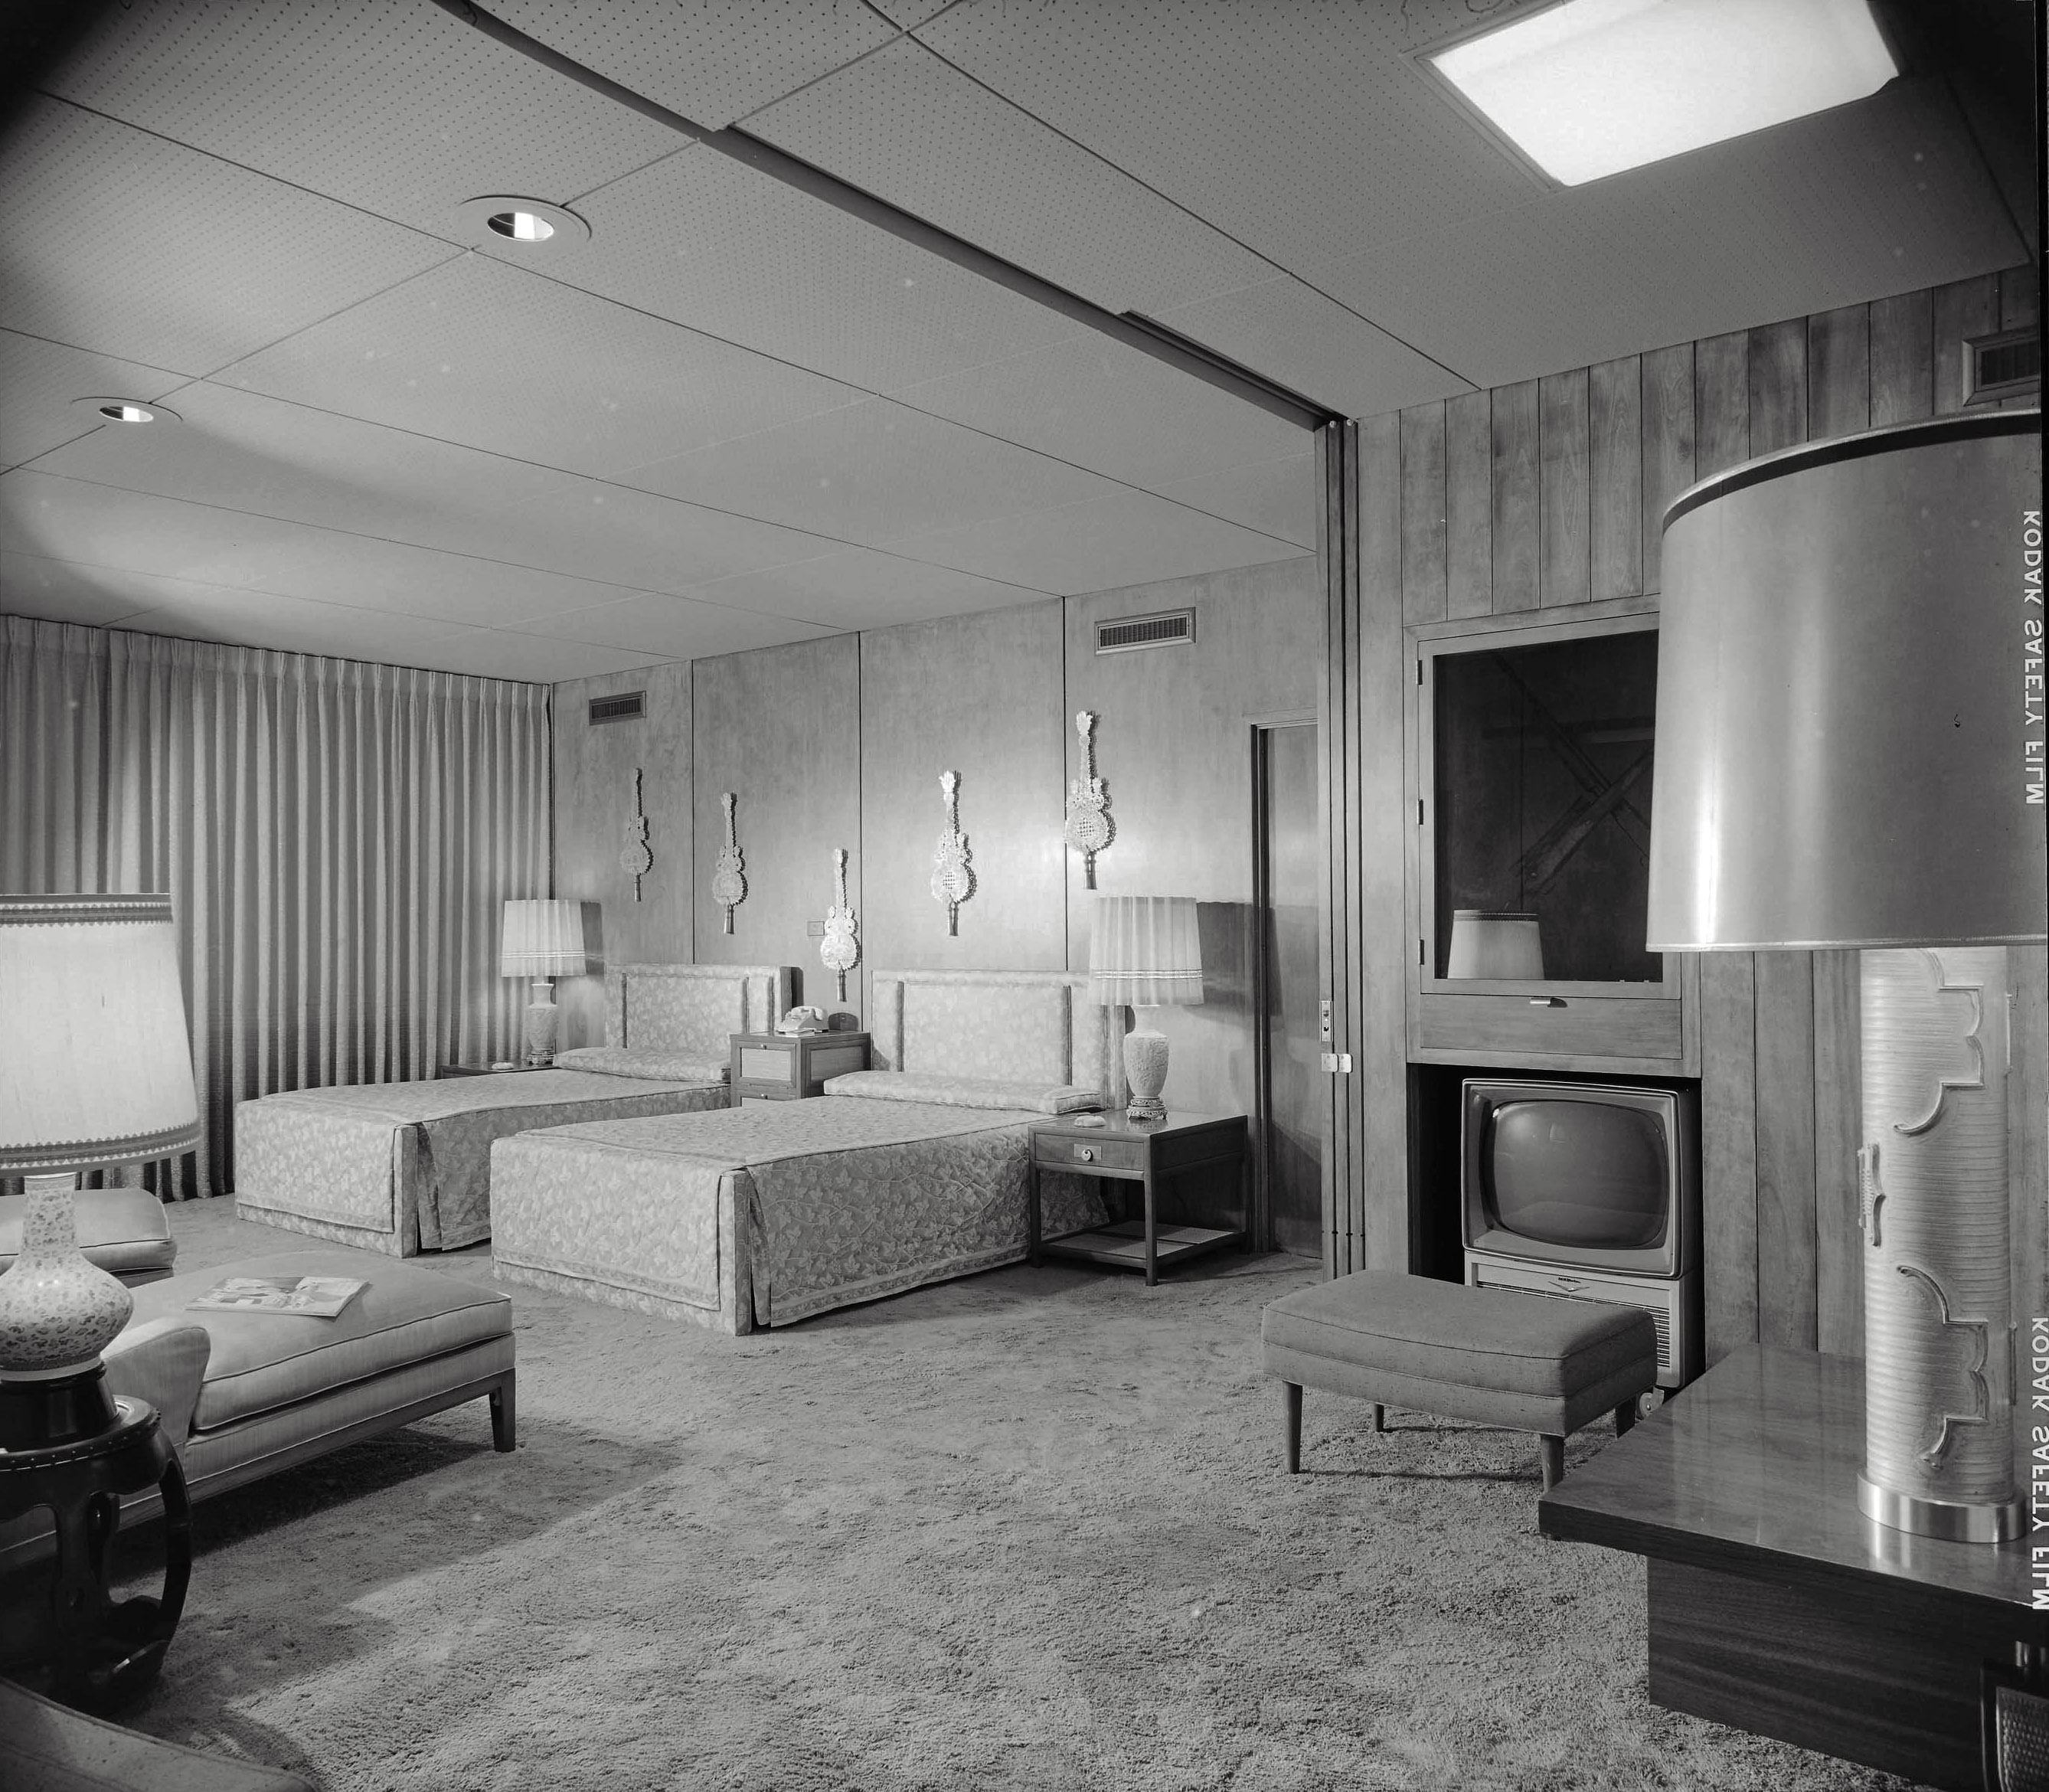 1956. "Hayes residence, Kessler Lake Drive, Dallas. Master bedroom. Architects: Prinz & Brooks." Our first  look at the seven-bathroom, 7,300-square-foot bungalow built by Texas car dealer Earl Hayes. 8x10 acetate negative by Maynard L. Parker for House Beautiful. Source: Huntington Library. View full size.